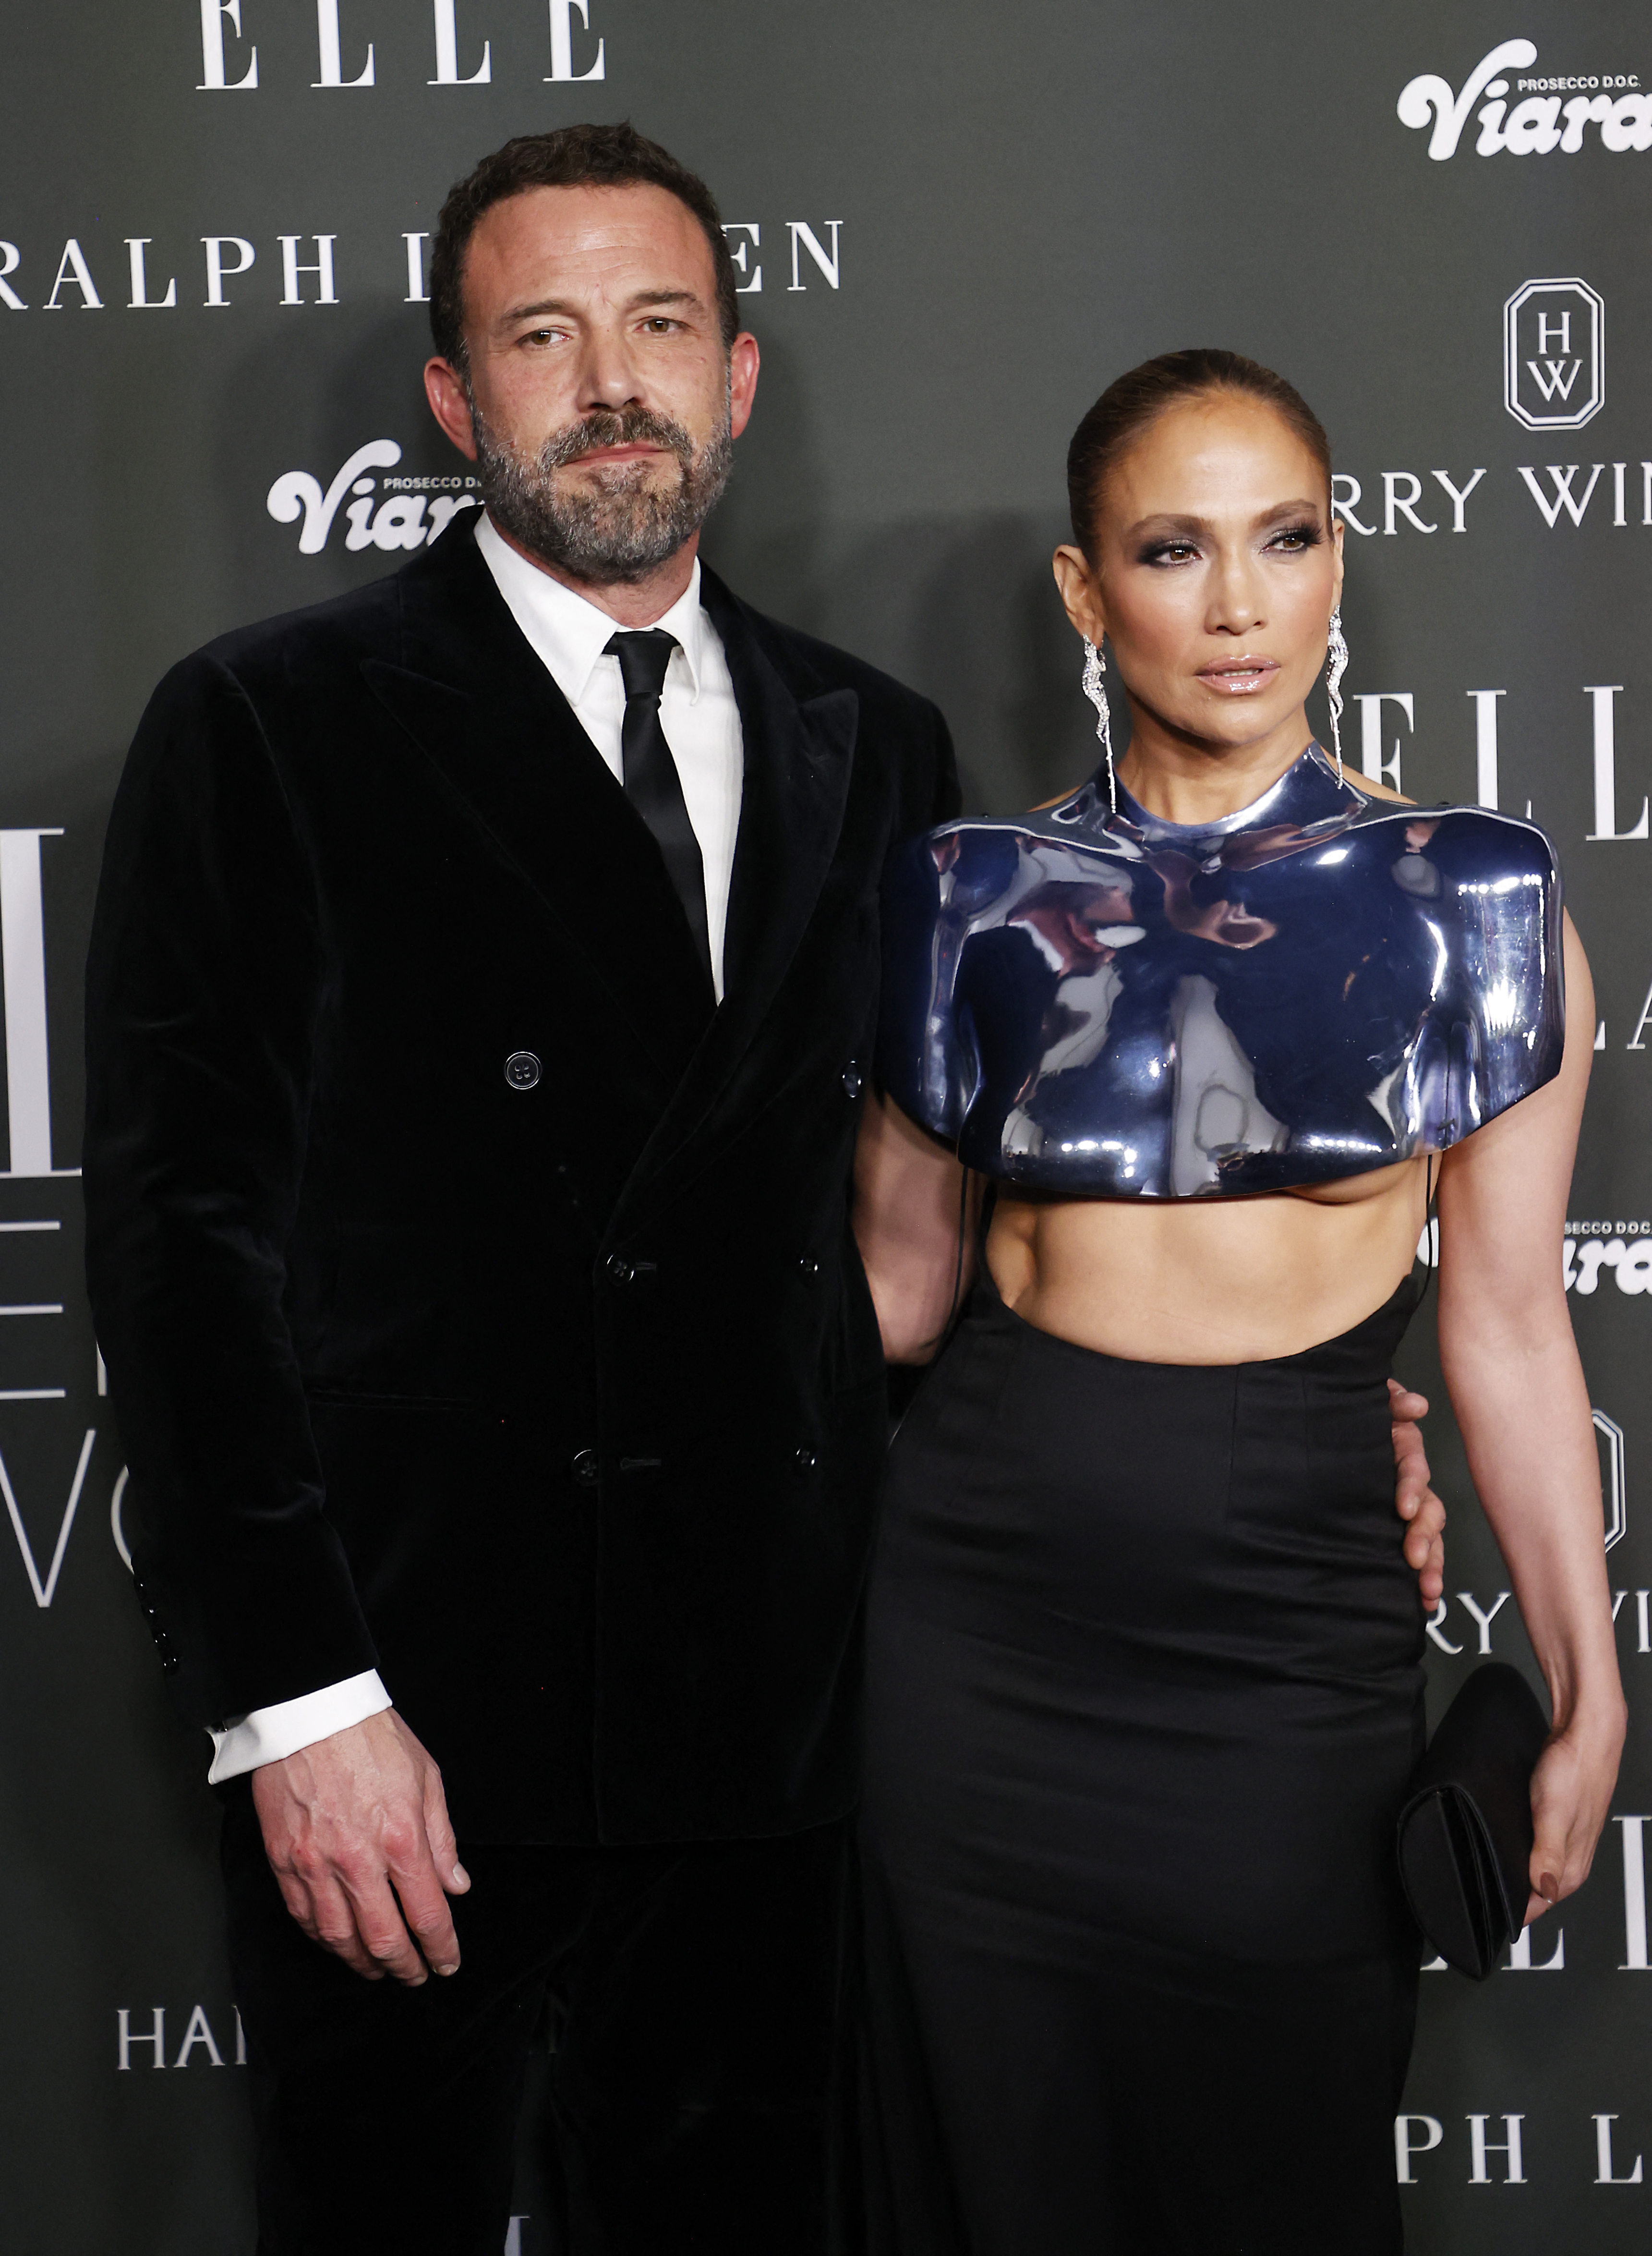 Are Jennifer Lopez and Ben Affleck Still Married Clues, Hints